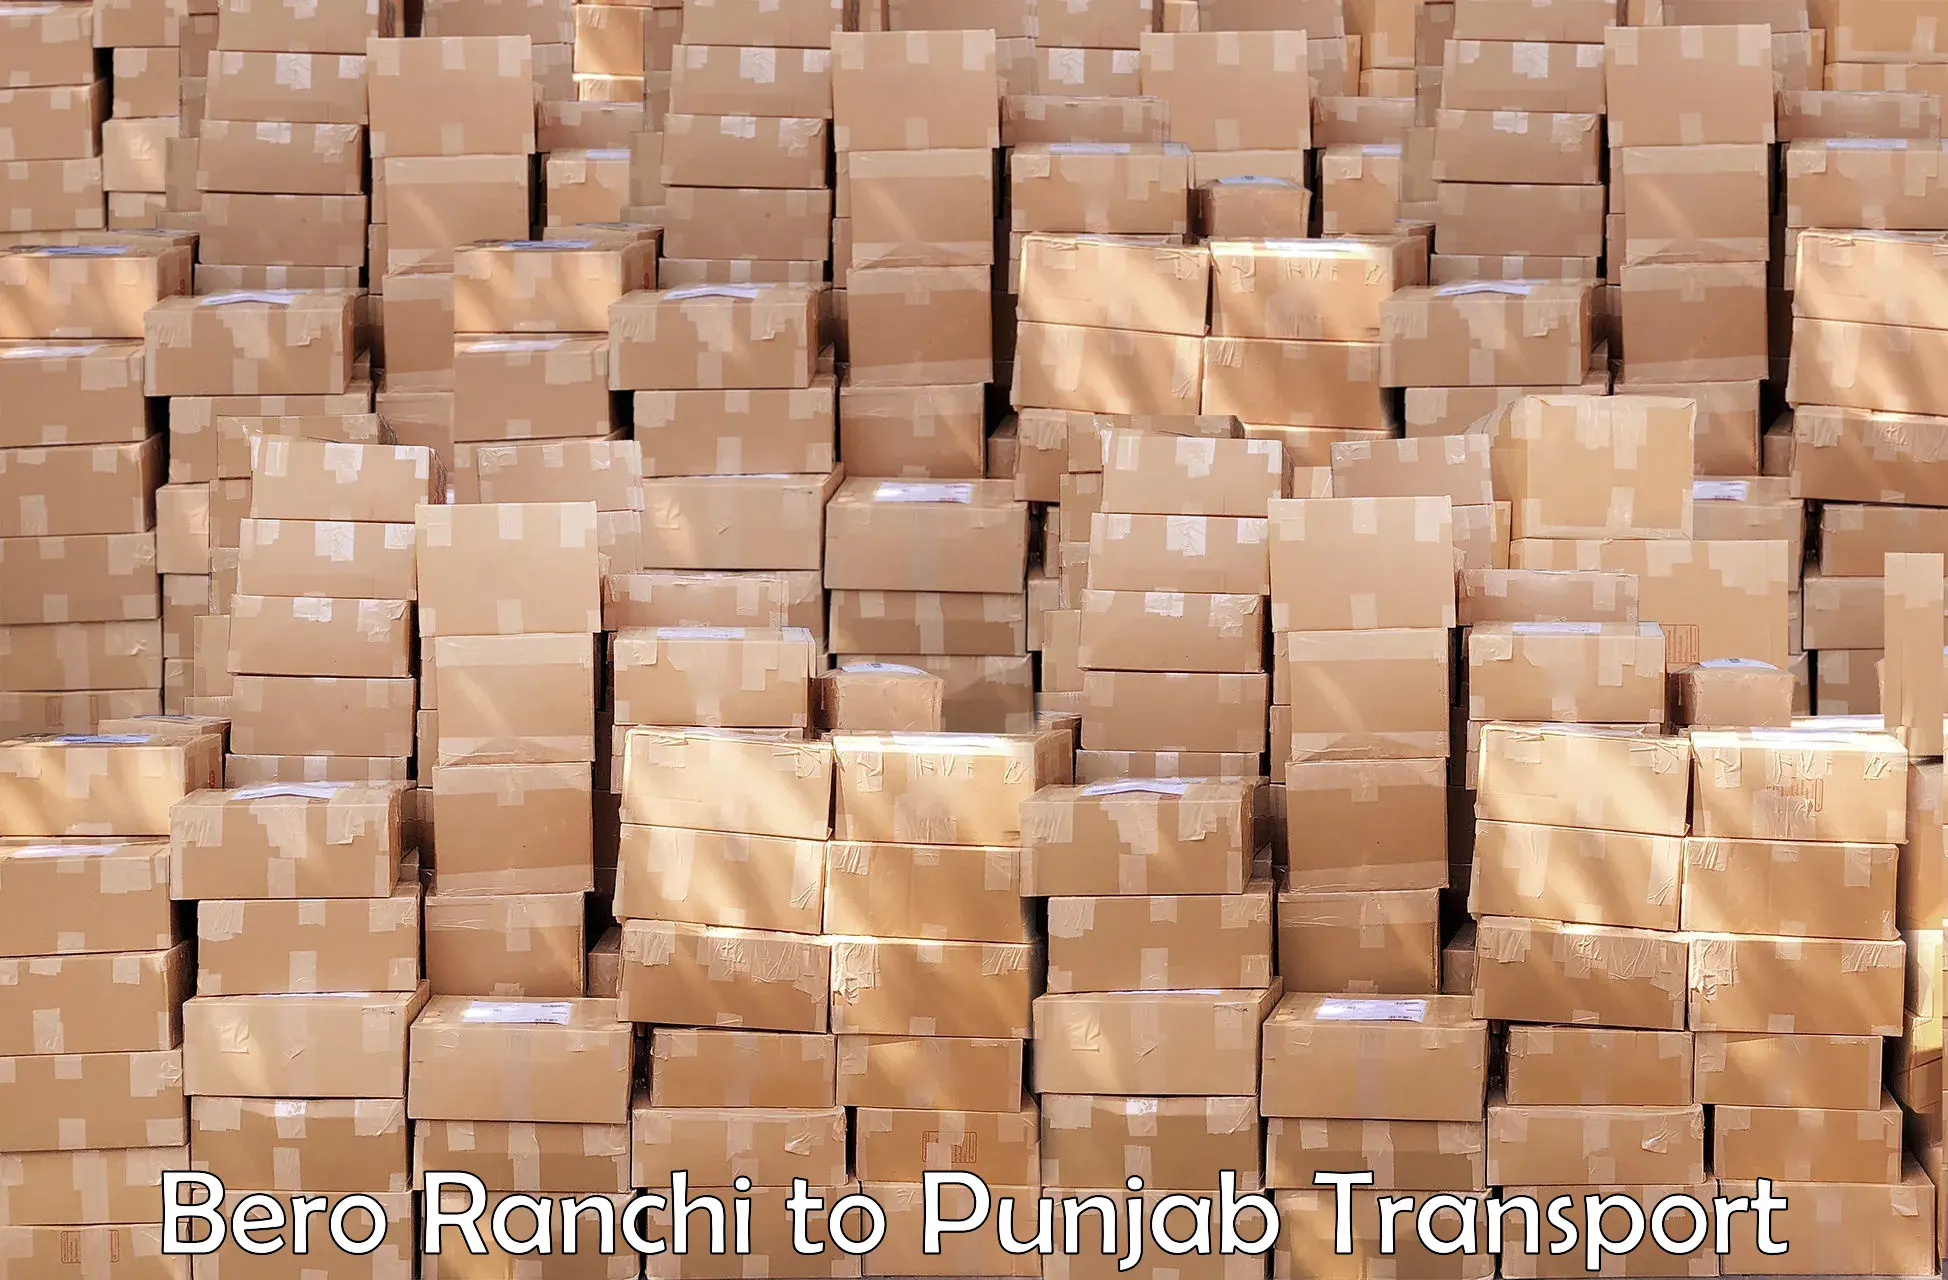 Container transport service Bero Ranchi to Amritsar